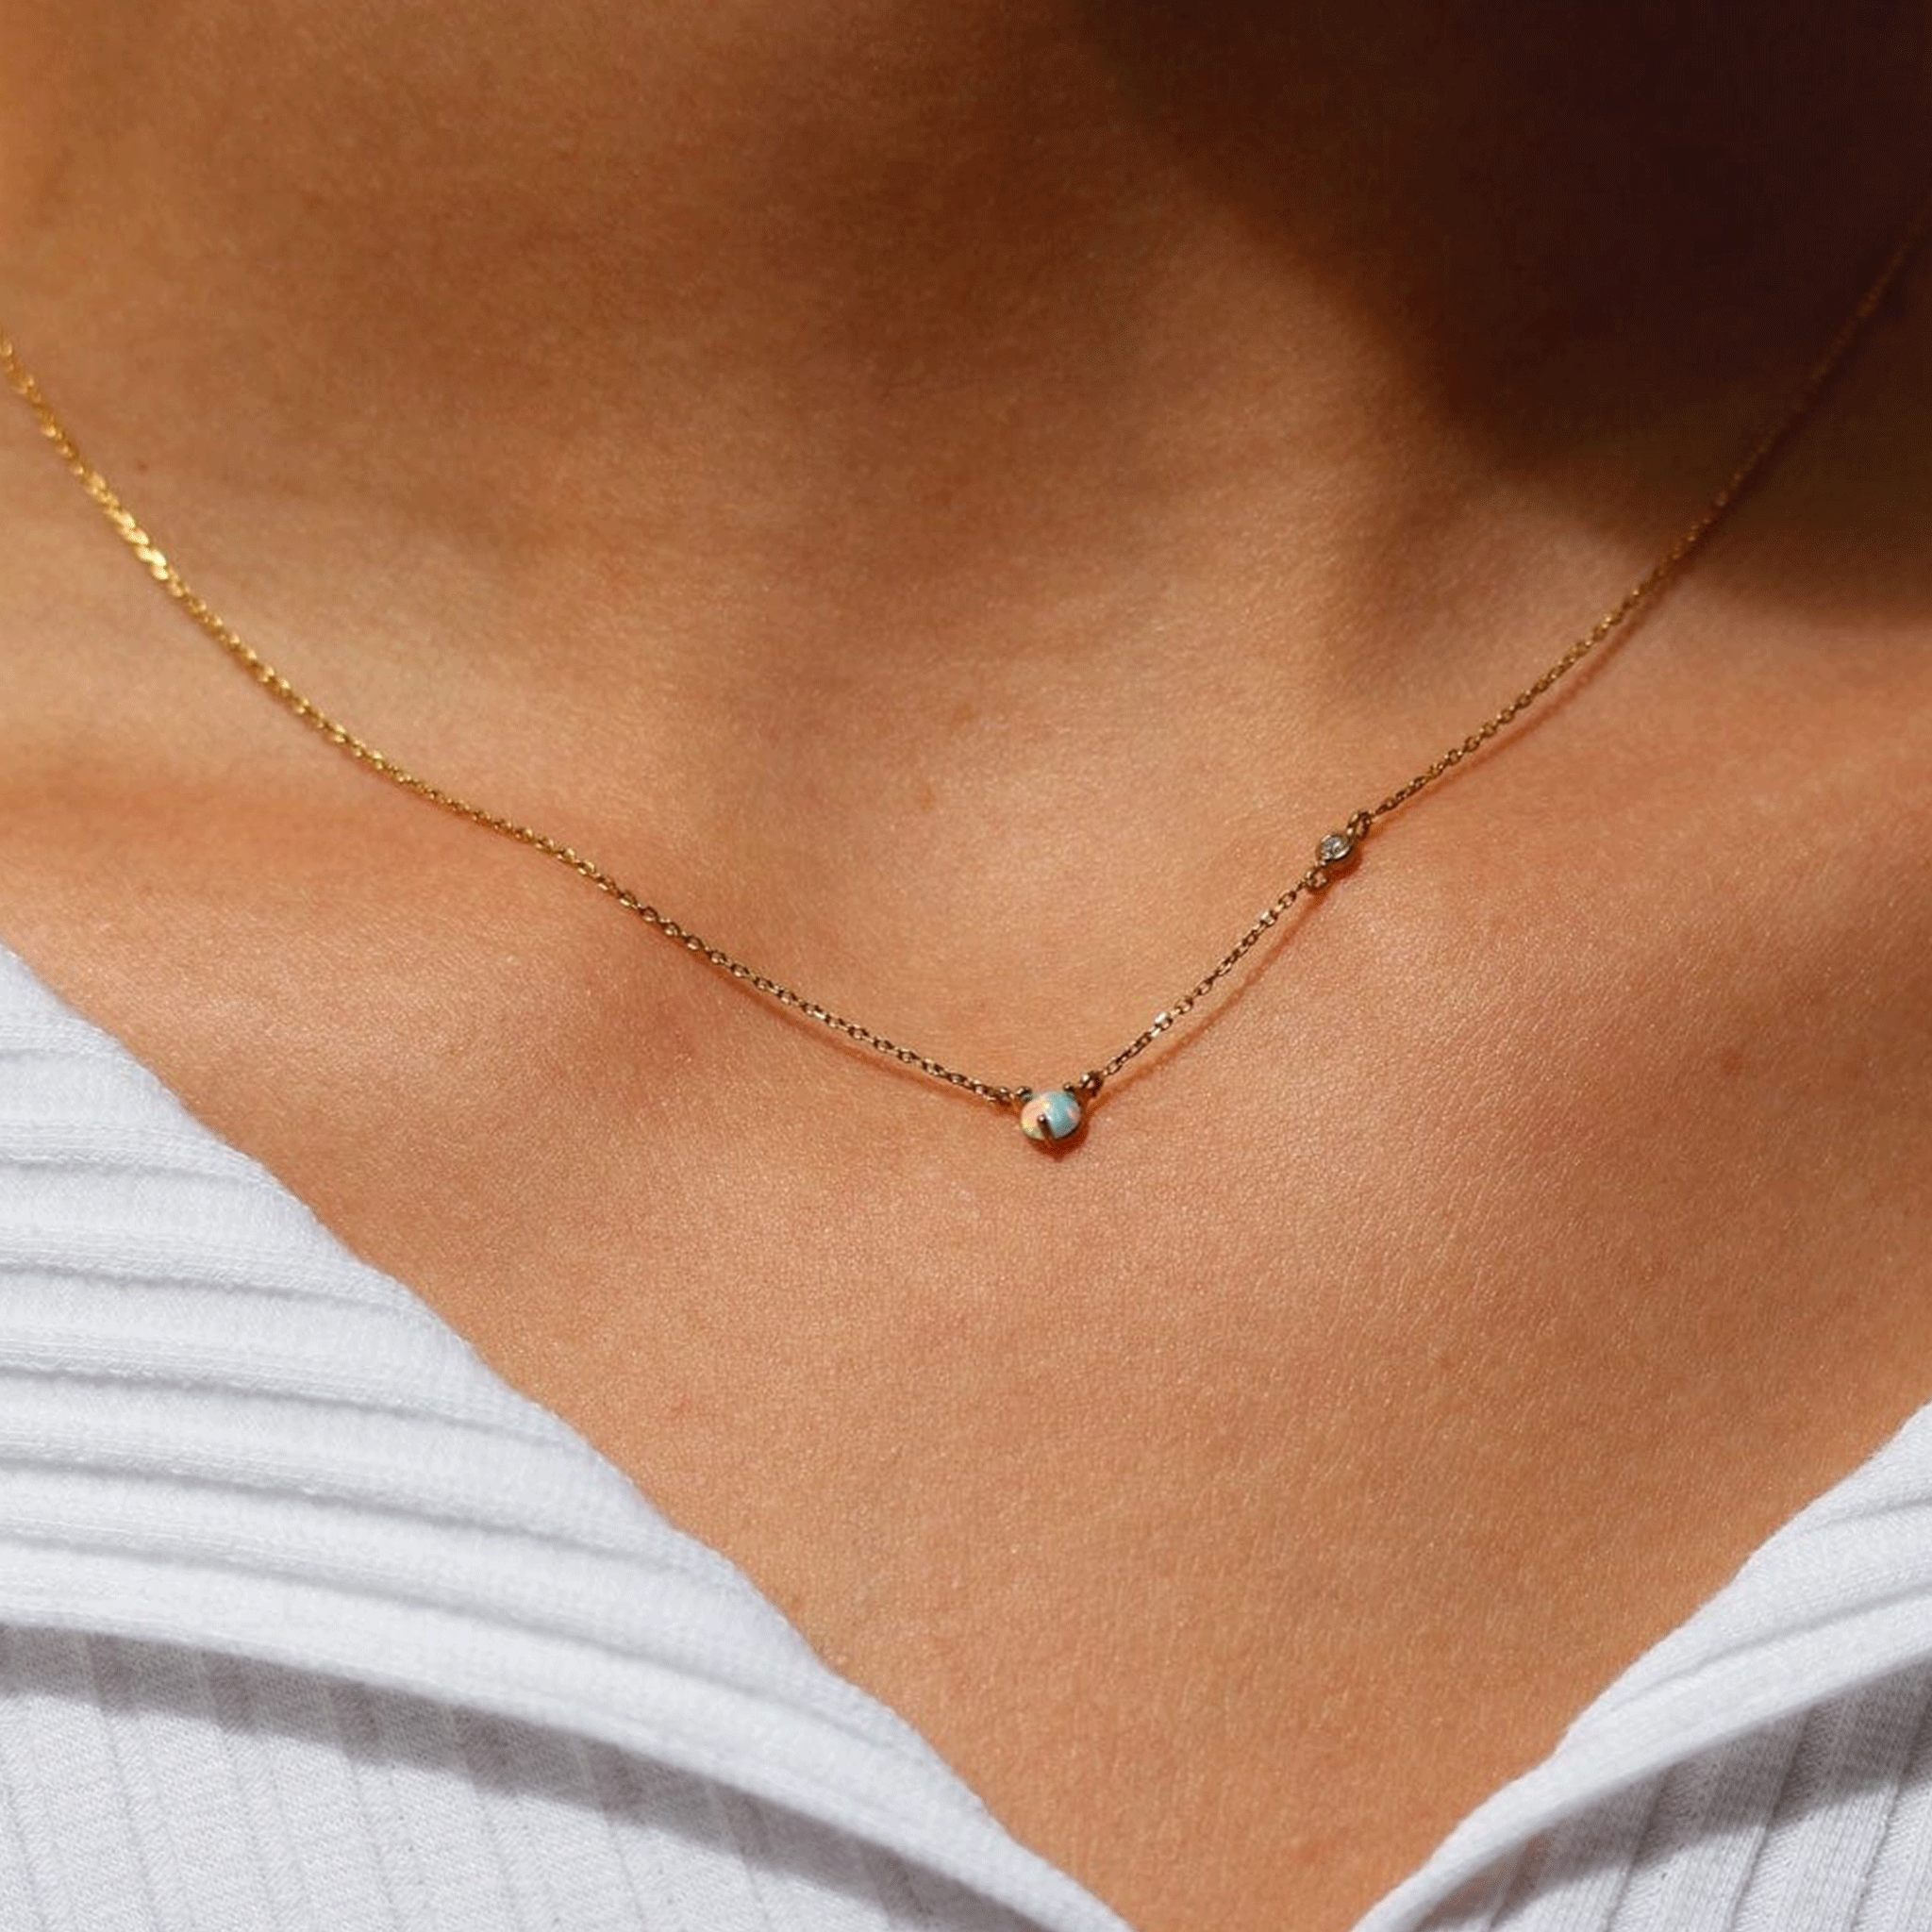 A dainty gold chain necklace with a circular opal stone in the center worn on a model.